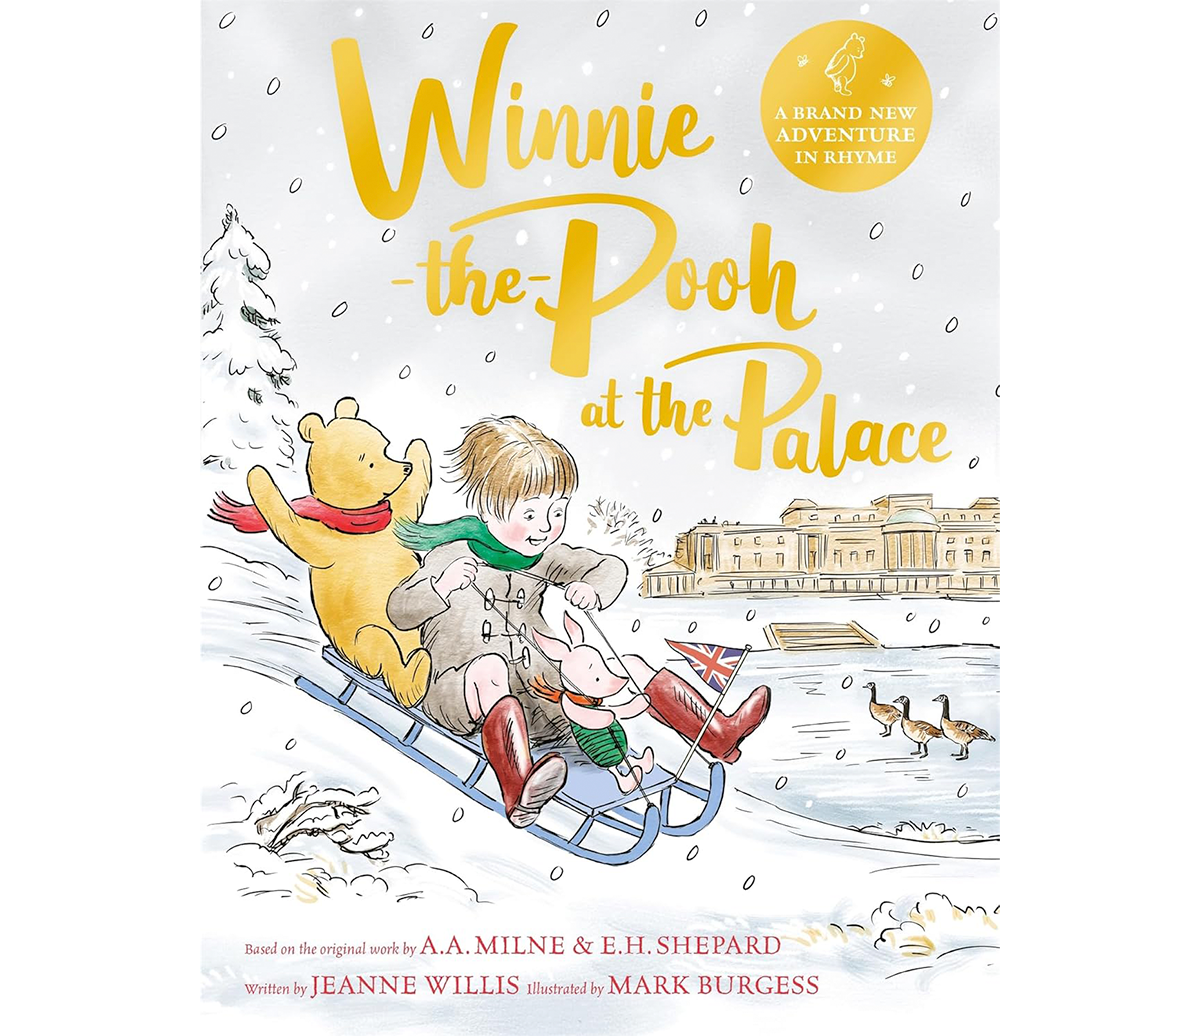 jeanne-willis-winnie-the-pooh-at-the-palace.png